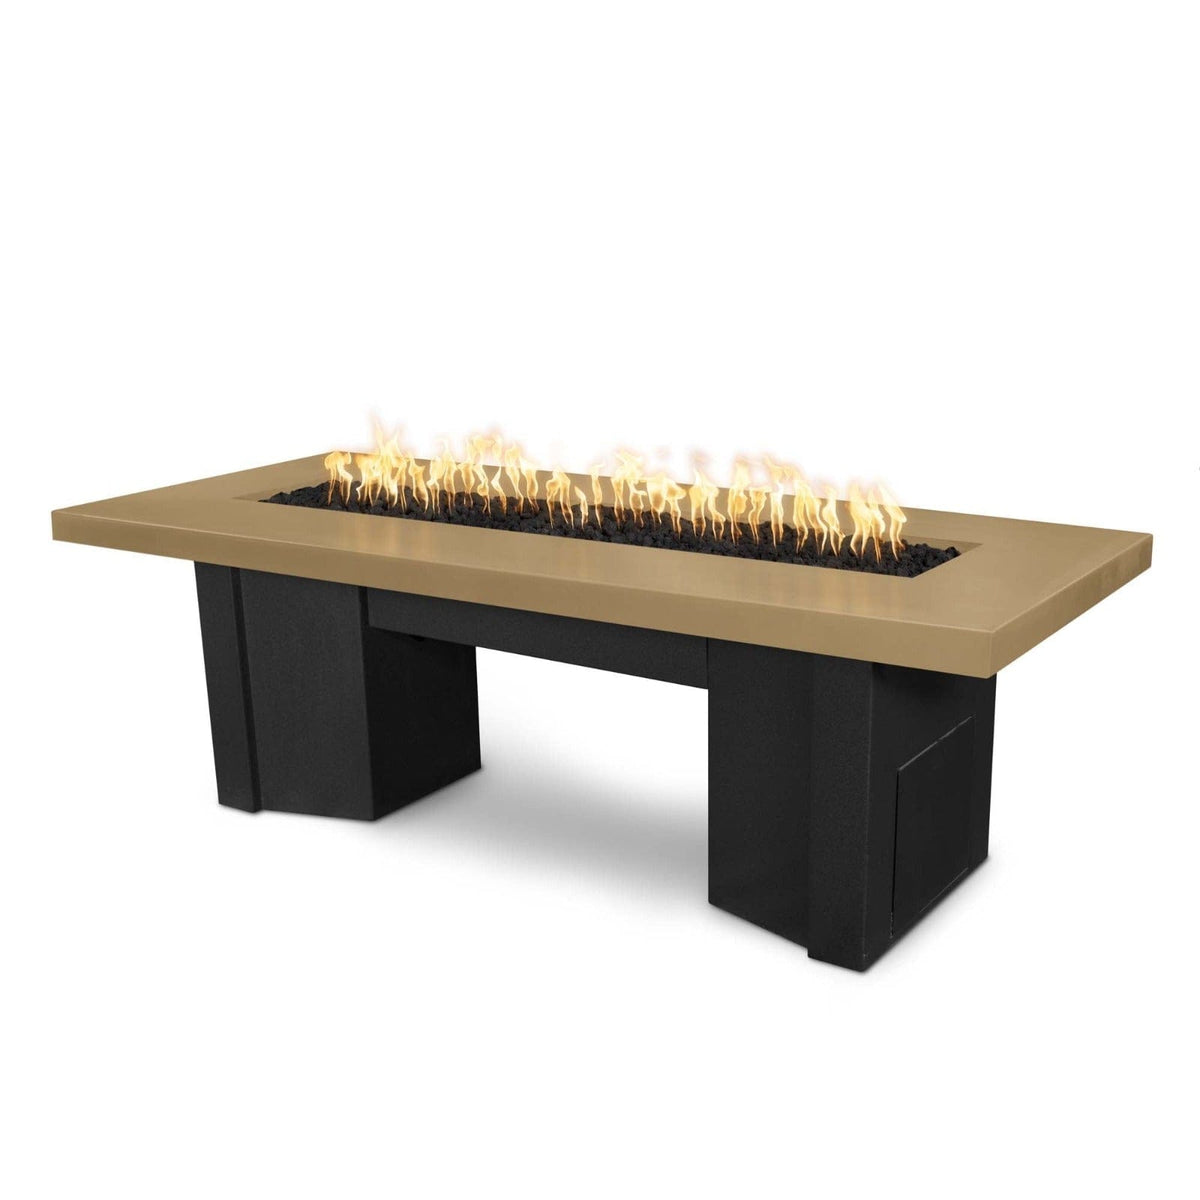 The Outdoor Plus Fire Features Brown (-BRN) / Black Powder Coated Steel (-BLK) The Outdoor Plus 78&quot; Alameda Fire Table Smooth Concrete in Liquid Propane - 110V Plug &amp; Play Electronic Ignition / OPT-ALMGFRC78EKIT-LP